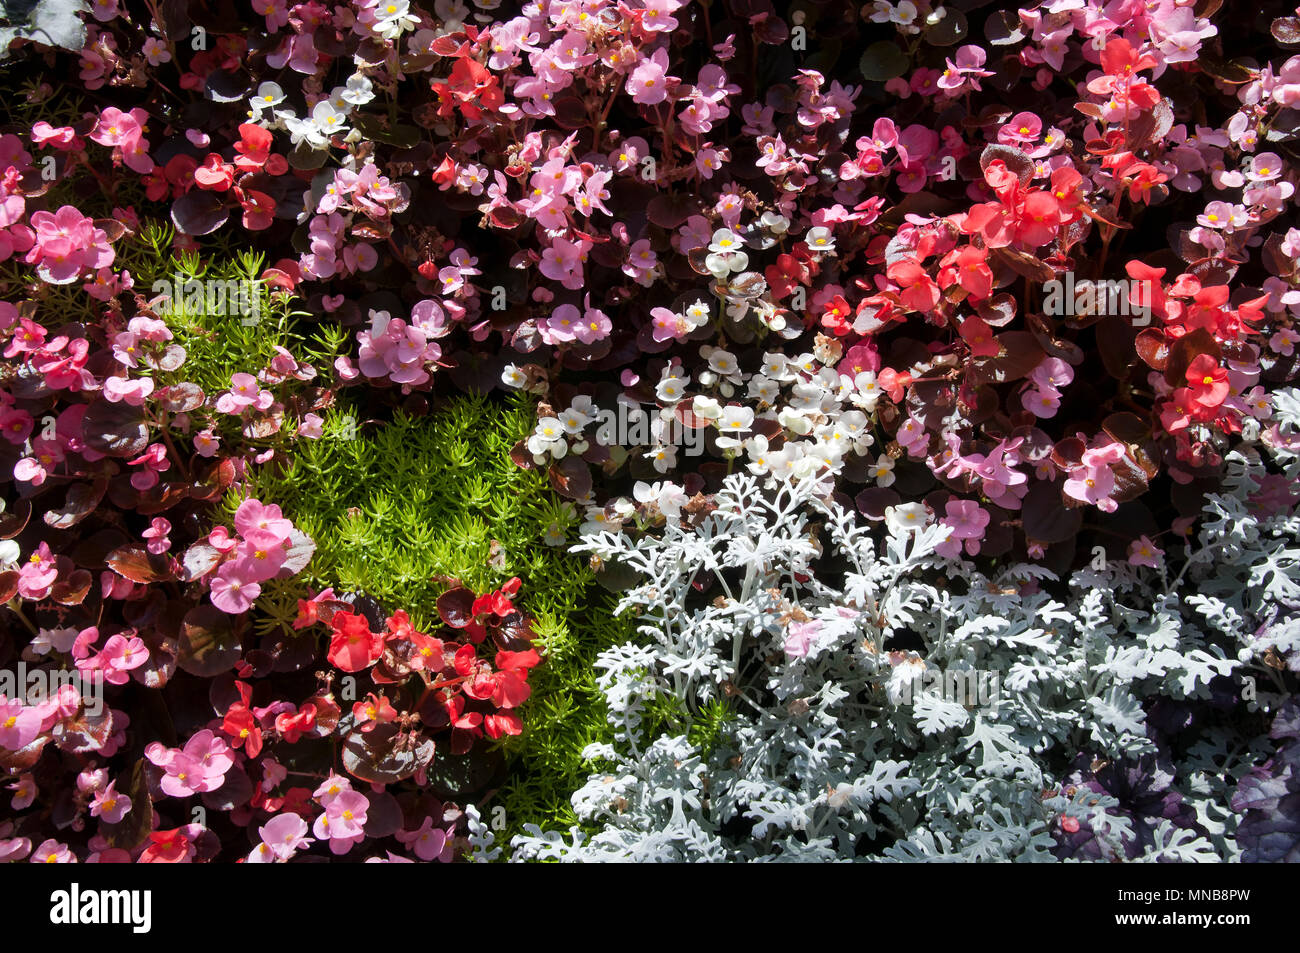 Sydney Australia, plant wall with wax begonia, dusty miller and gold mound plants Stock Photo